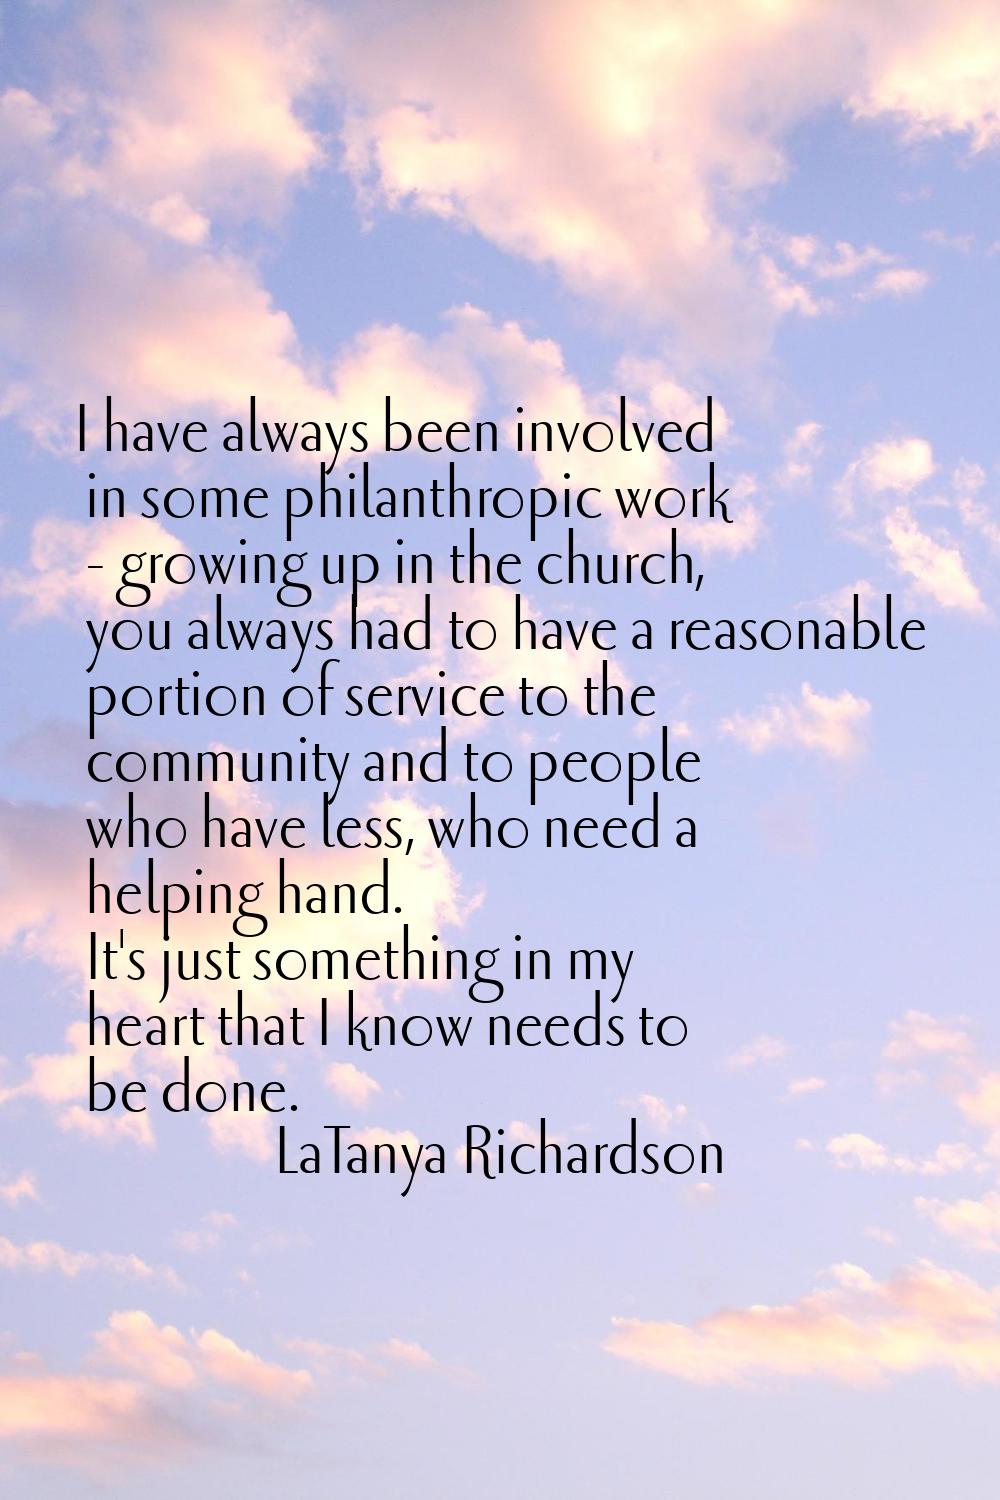 I have always been involved in some philanthropic work - growing up in the church, you always had t